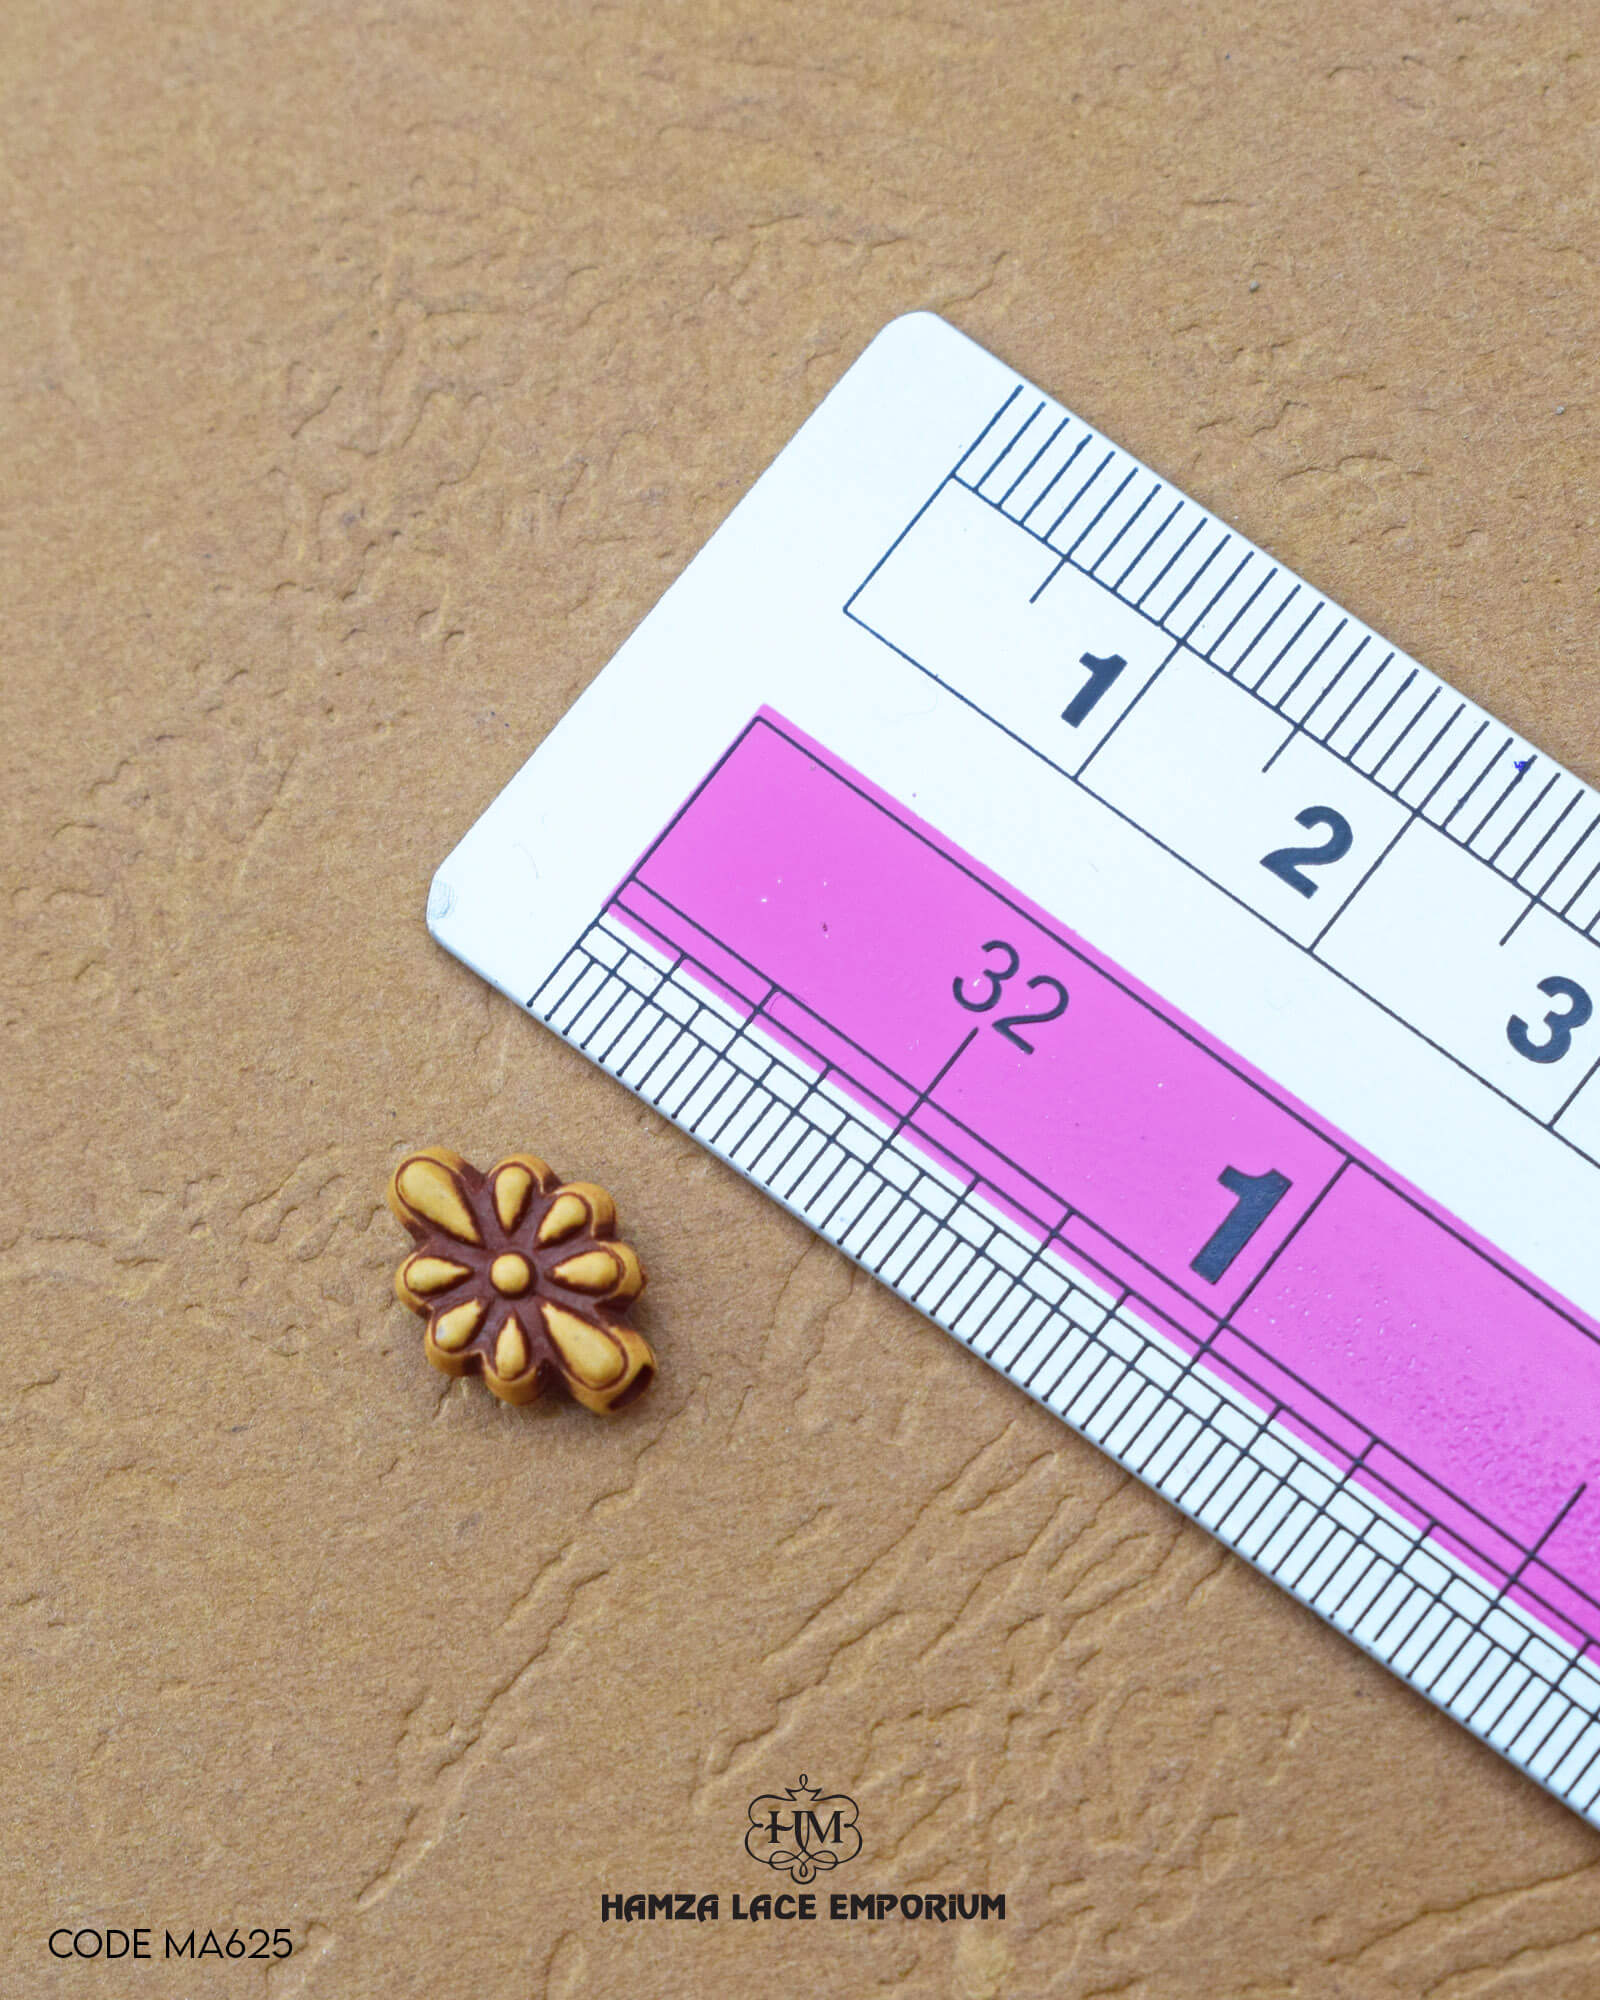 Size of the 'Flower Shape Wooden Button MA625' is shown with a ruler